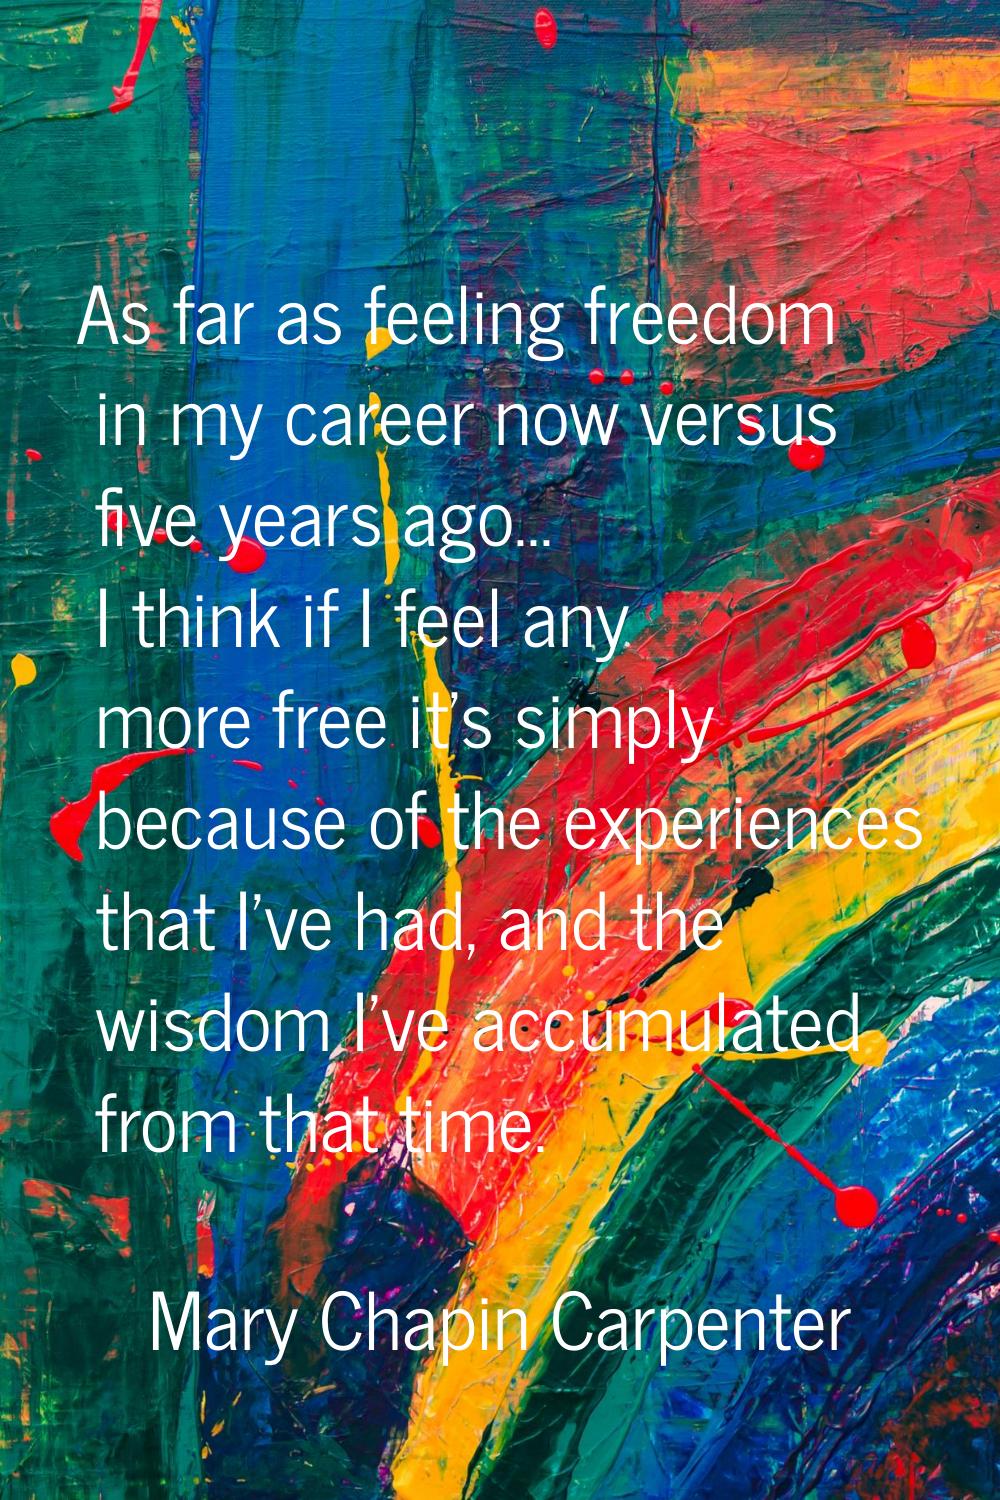 As far as feeling freedom in my career now versus five years ago... I think if I feel any more free